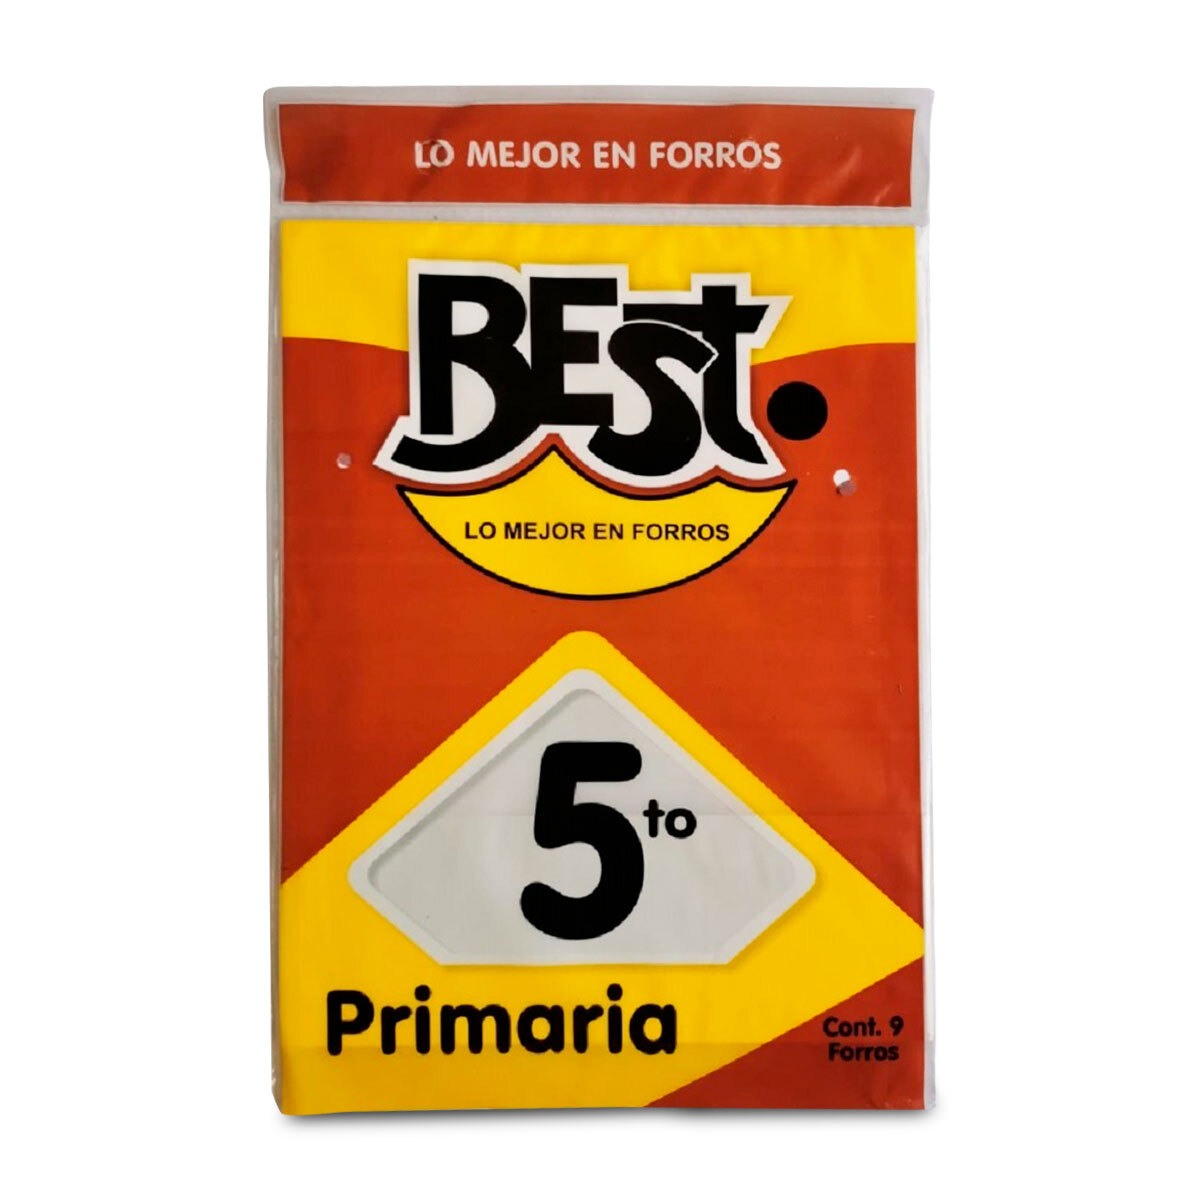 FORRO PLAST SEP C9 5TO BEST